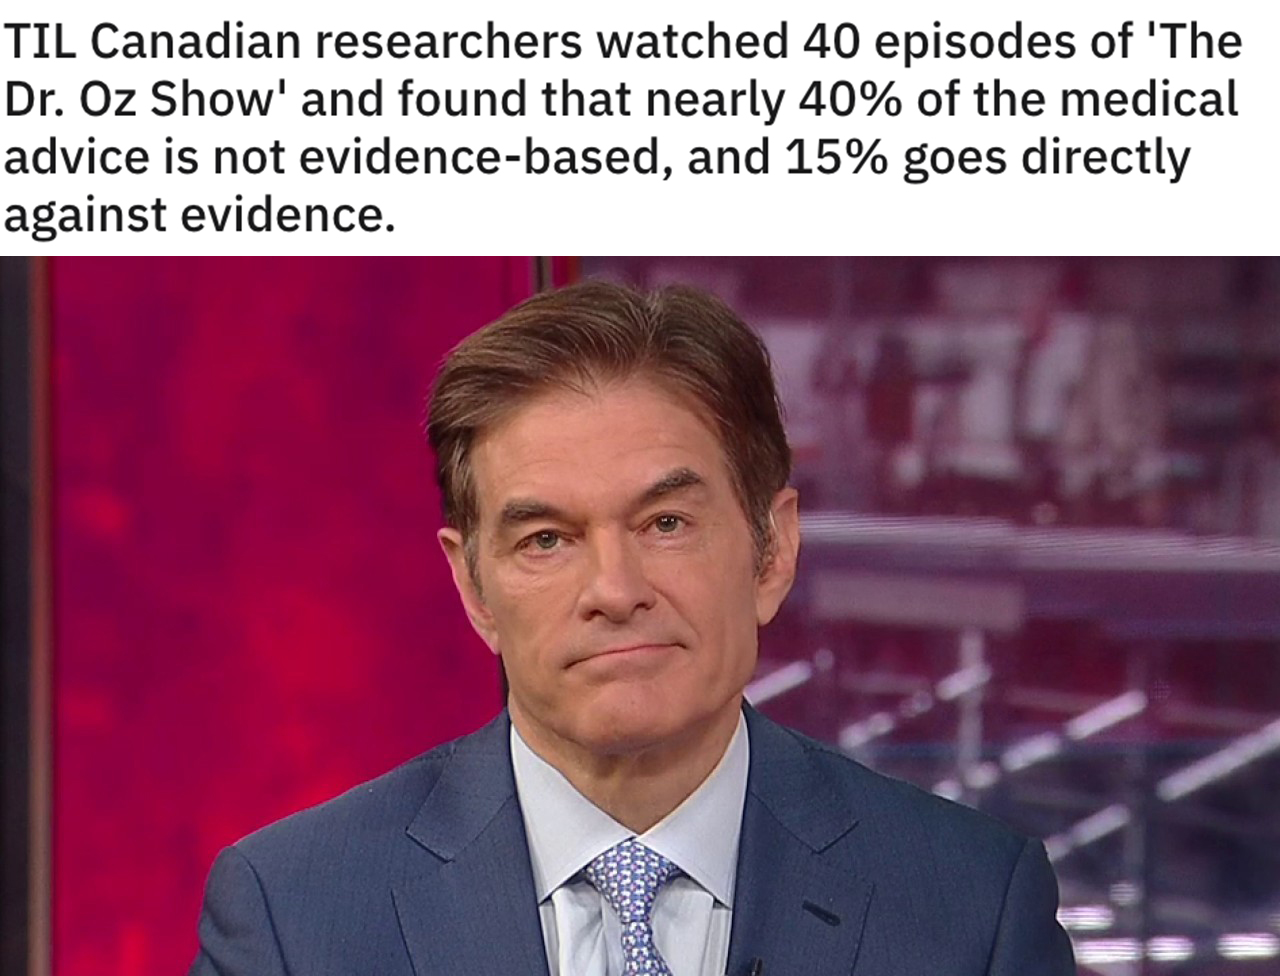 reddit today I learned posts - Til Canadian researchers watched 40 episodes of 'The Dr. Oz Show' and found that nearly 40% of the medical advice is not evidence-based, and 15% goes directly against evidence.